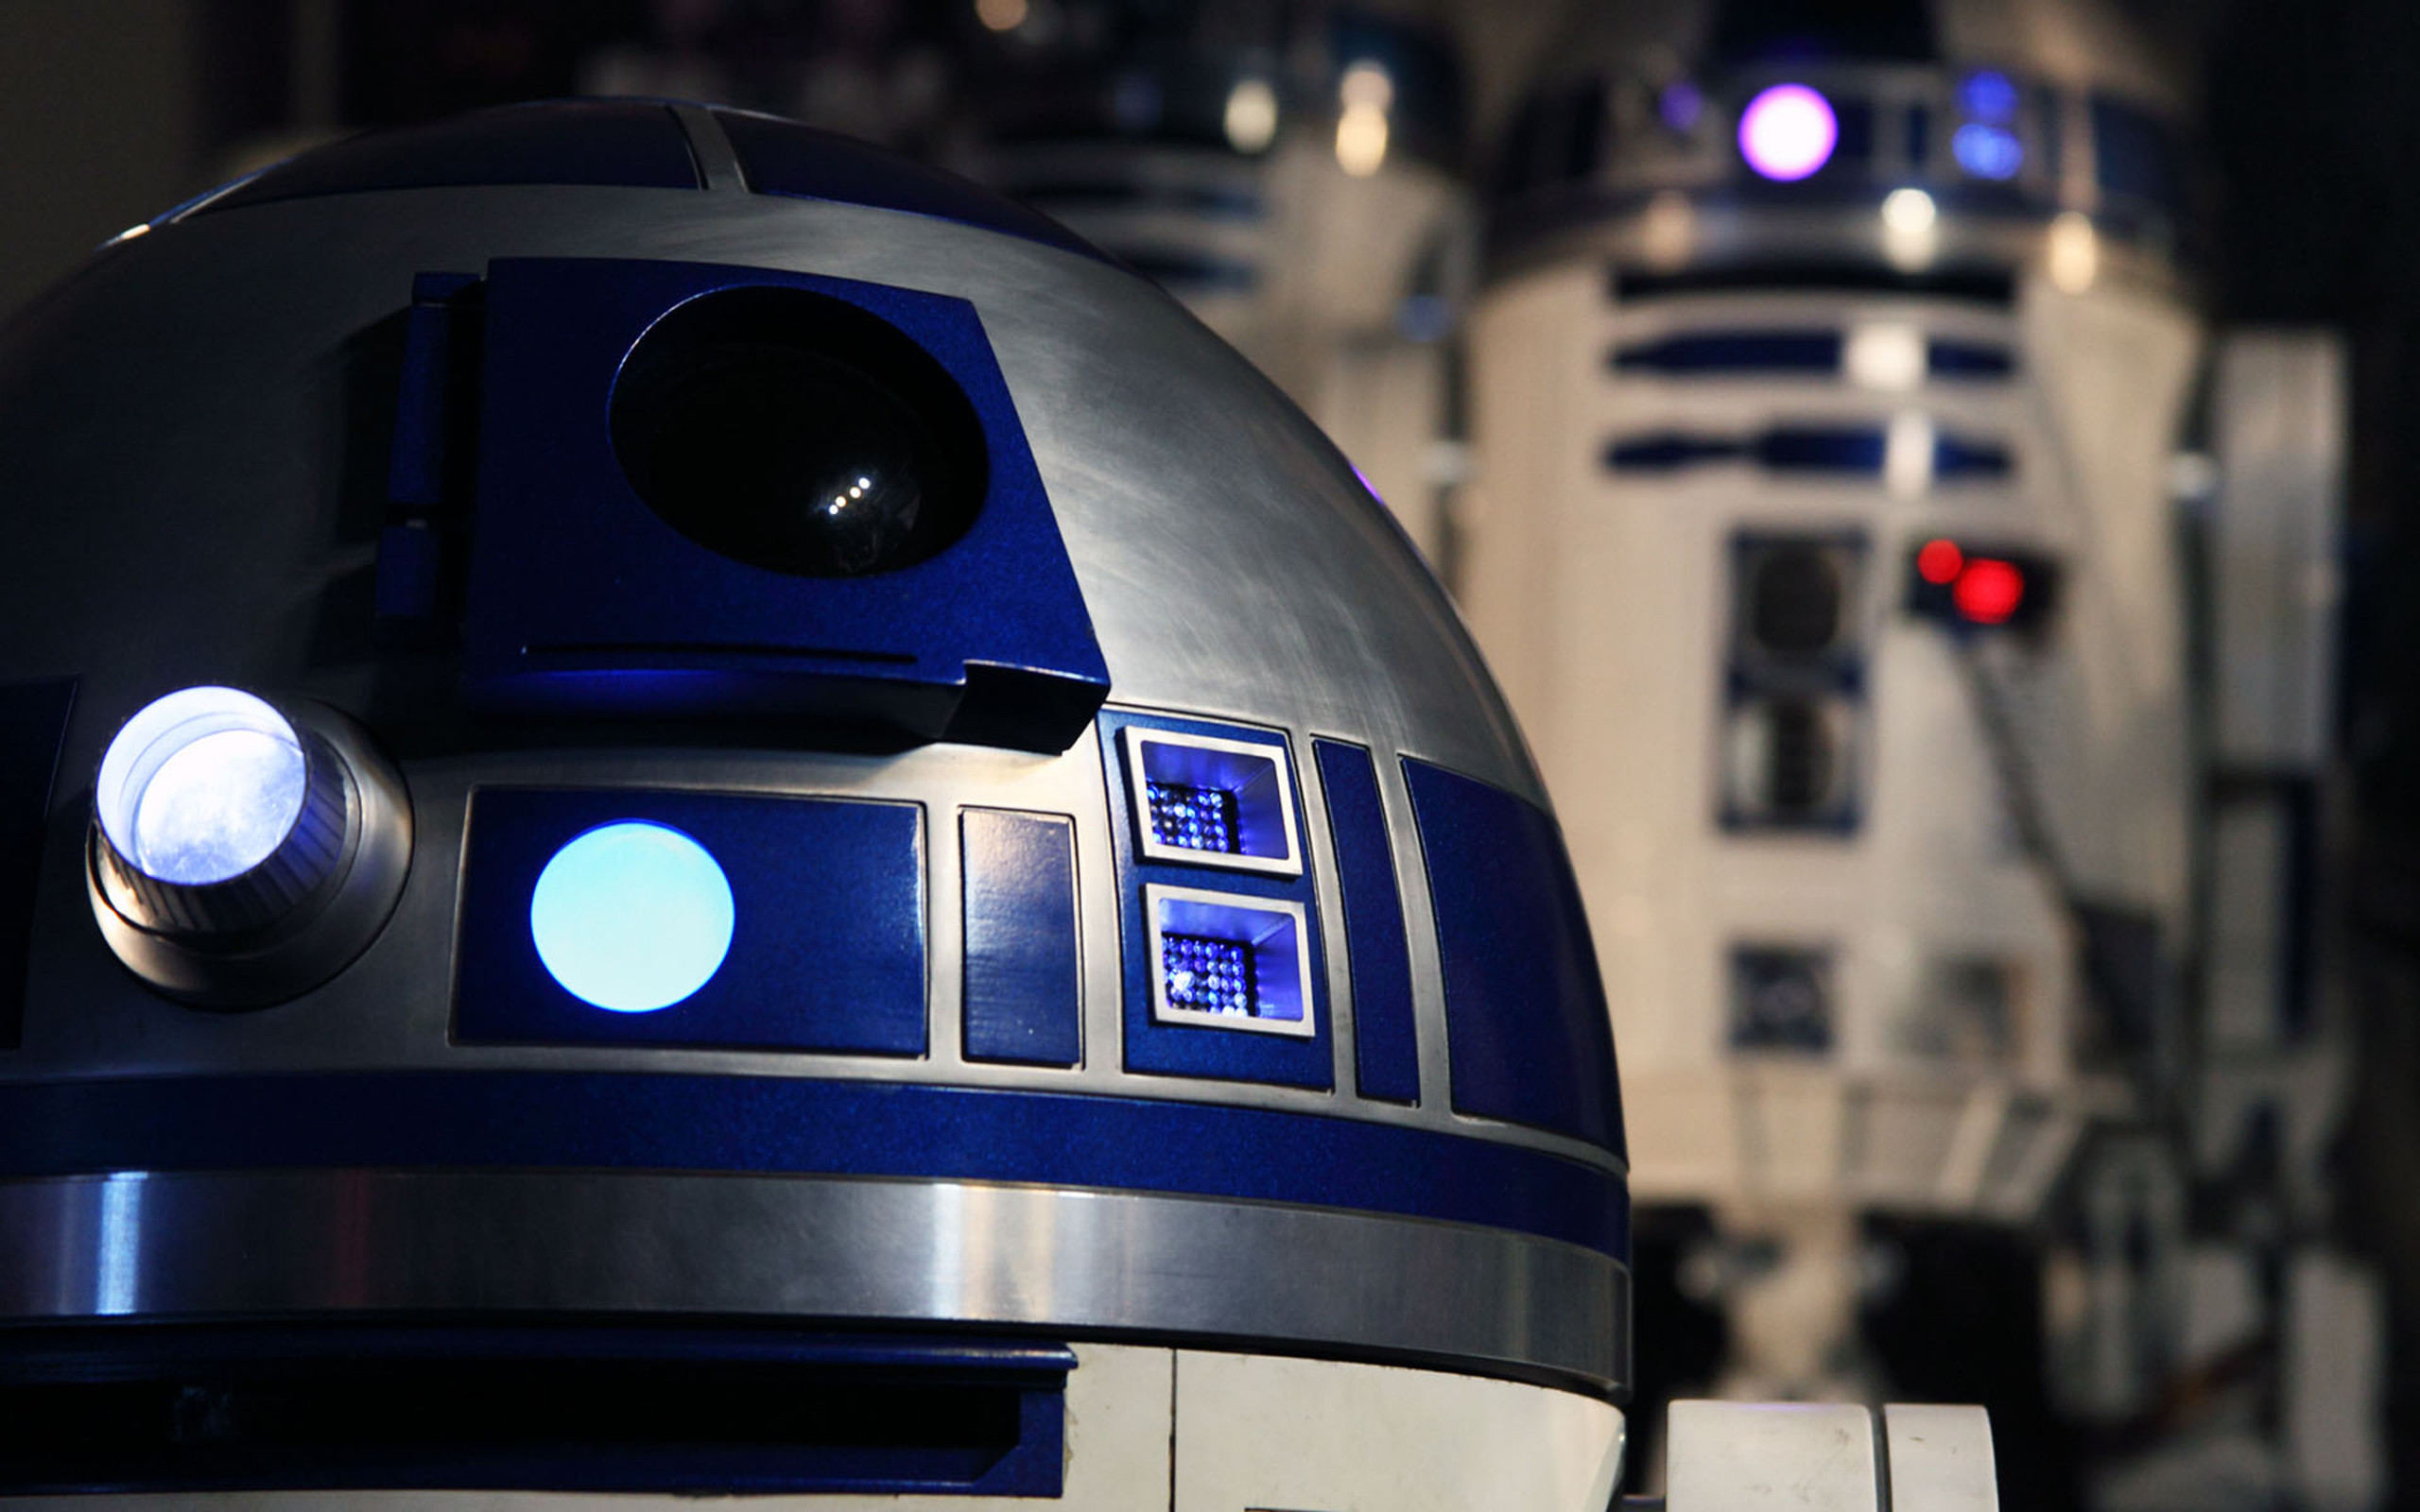 46 R2-D2 HD Wallpapers | Backgrounds - Wallpaper Abyss